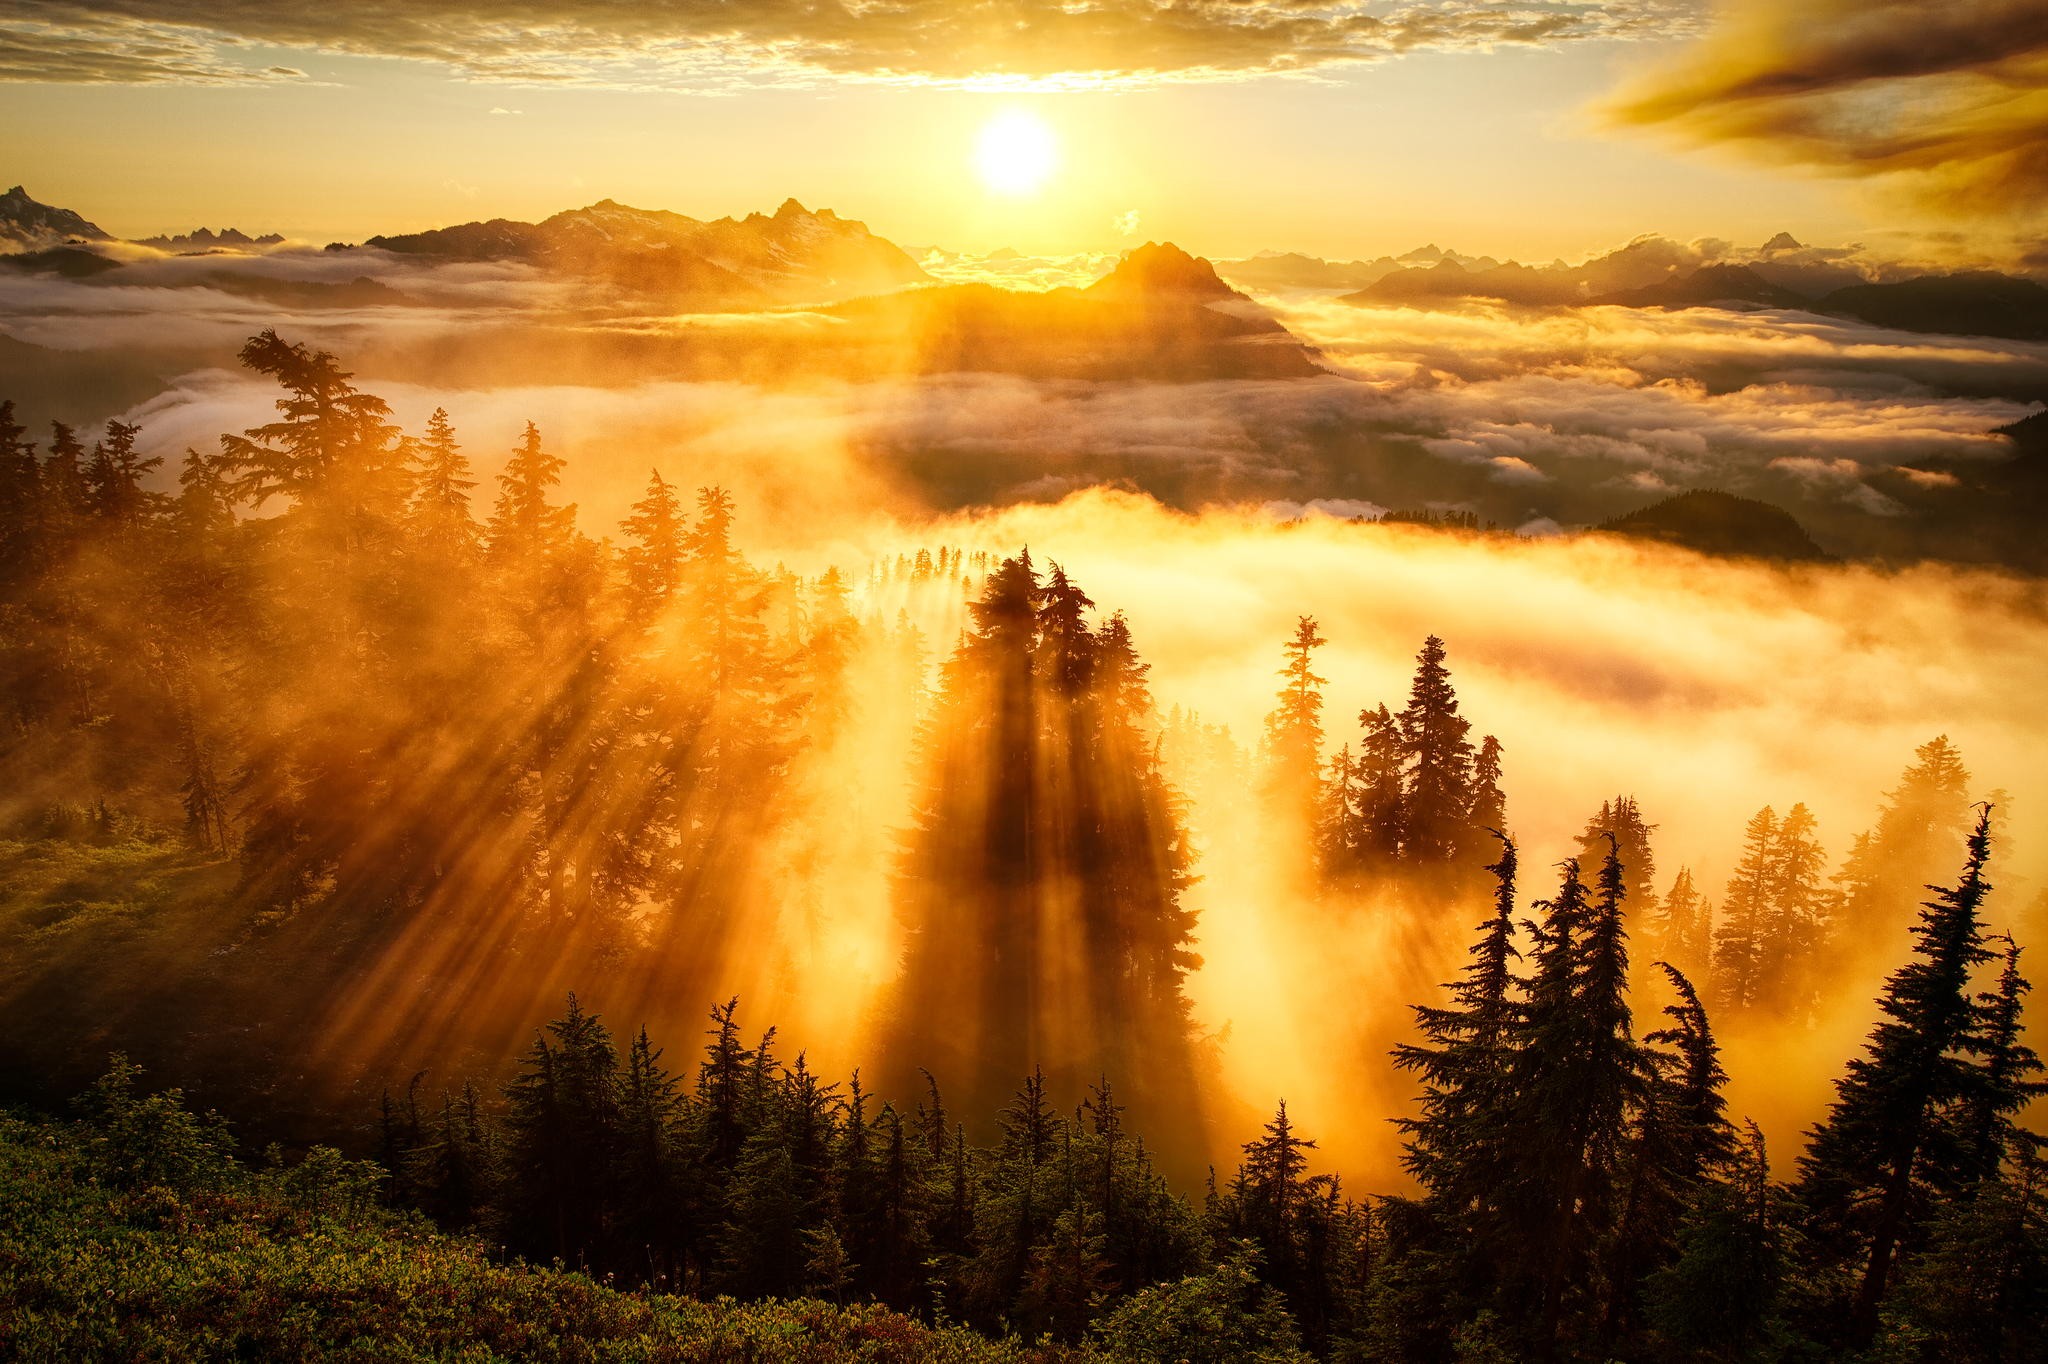 General 2048x1364 landscape sun rays forest mountains clouds nature sunlight trees crepuscular rays